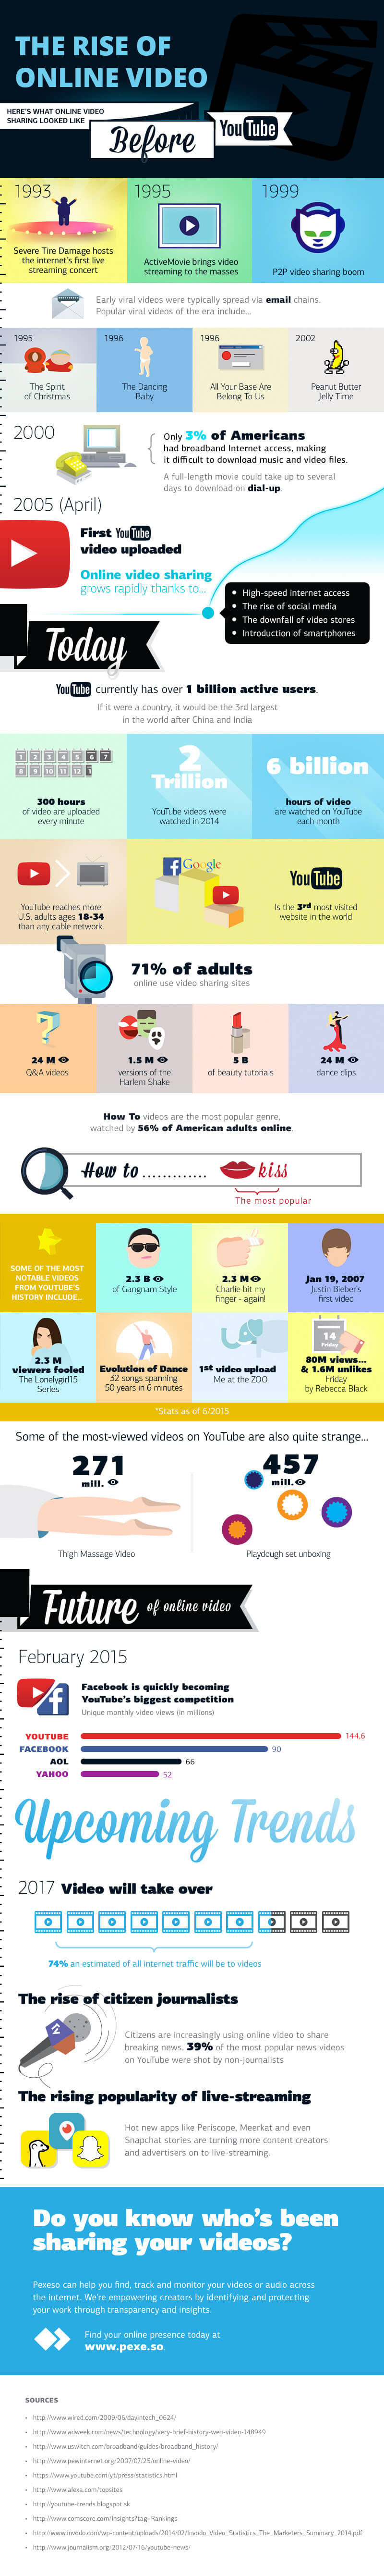 YouTube online video infographic